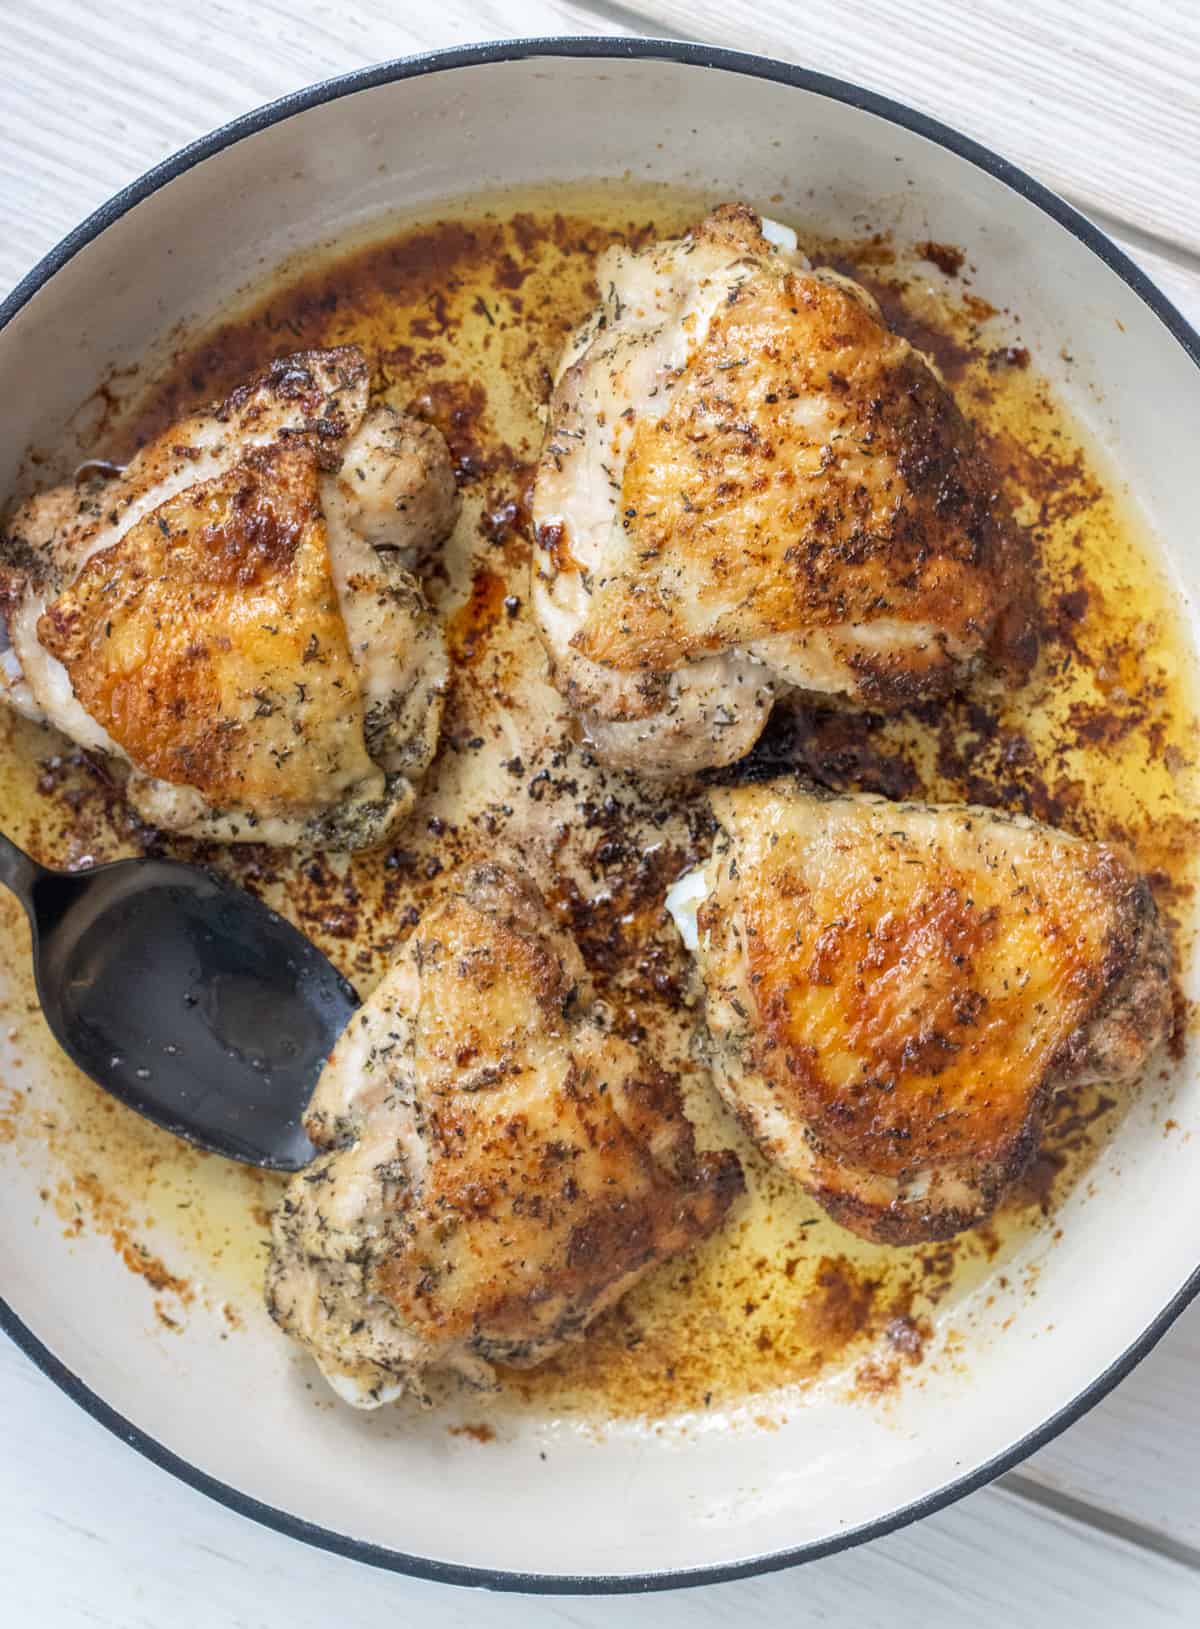 Four pan seared chicken thighs in the pan with a spoon.